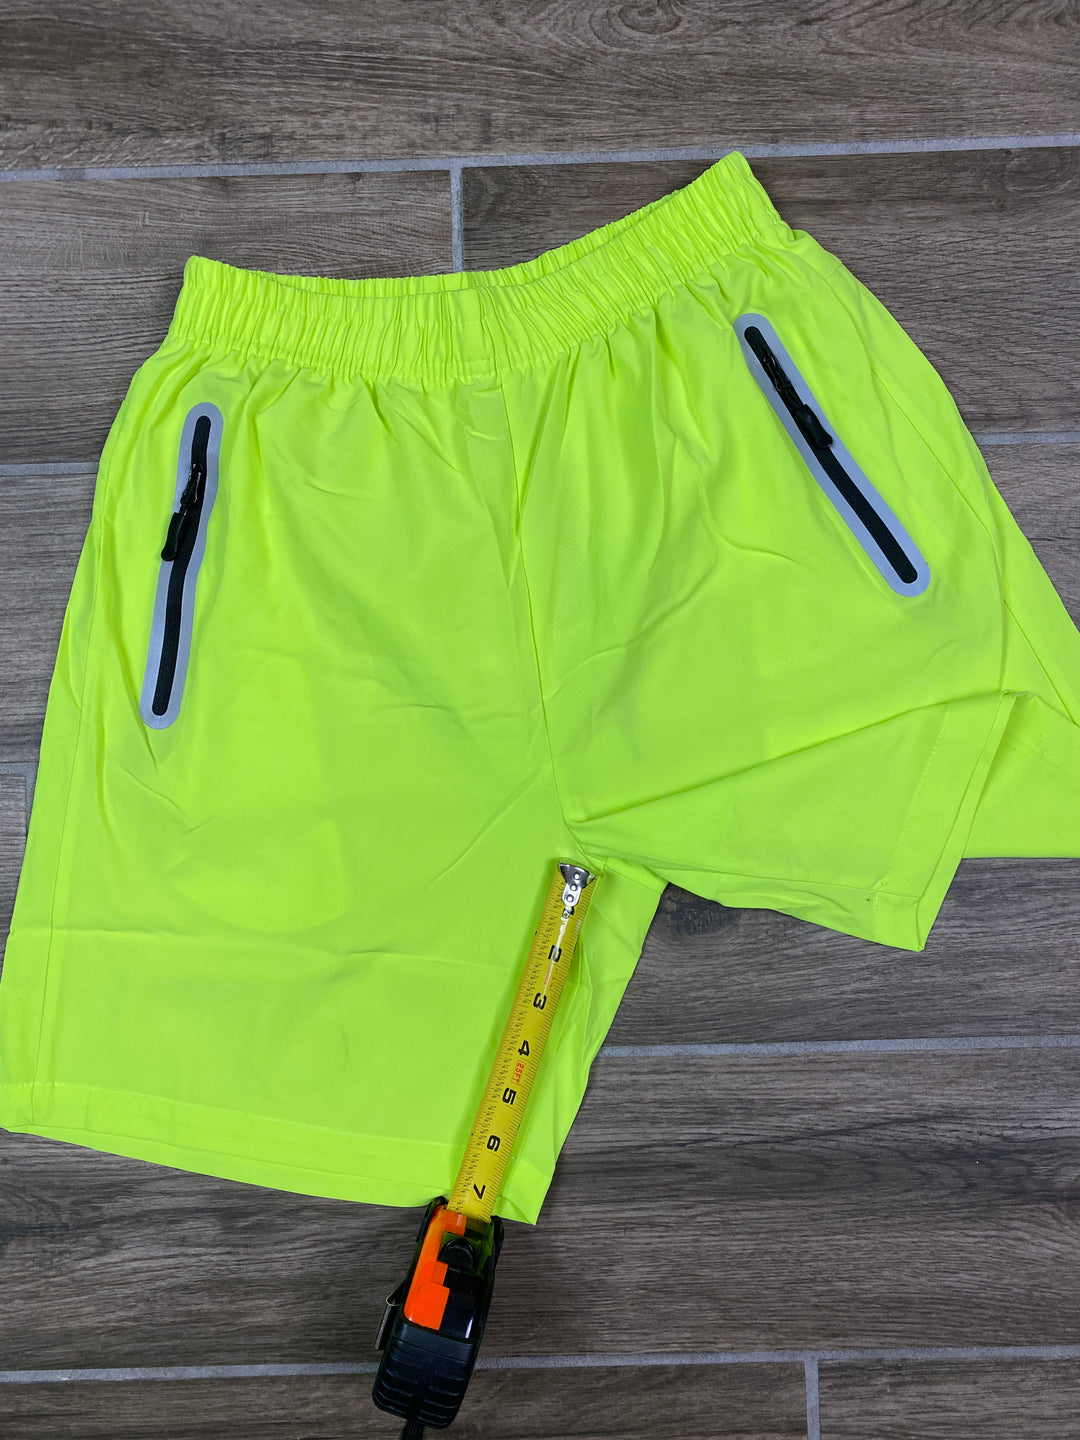 Performance Running Shorts with Mesh Lining inside! – Embroidery Plug